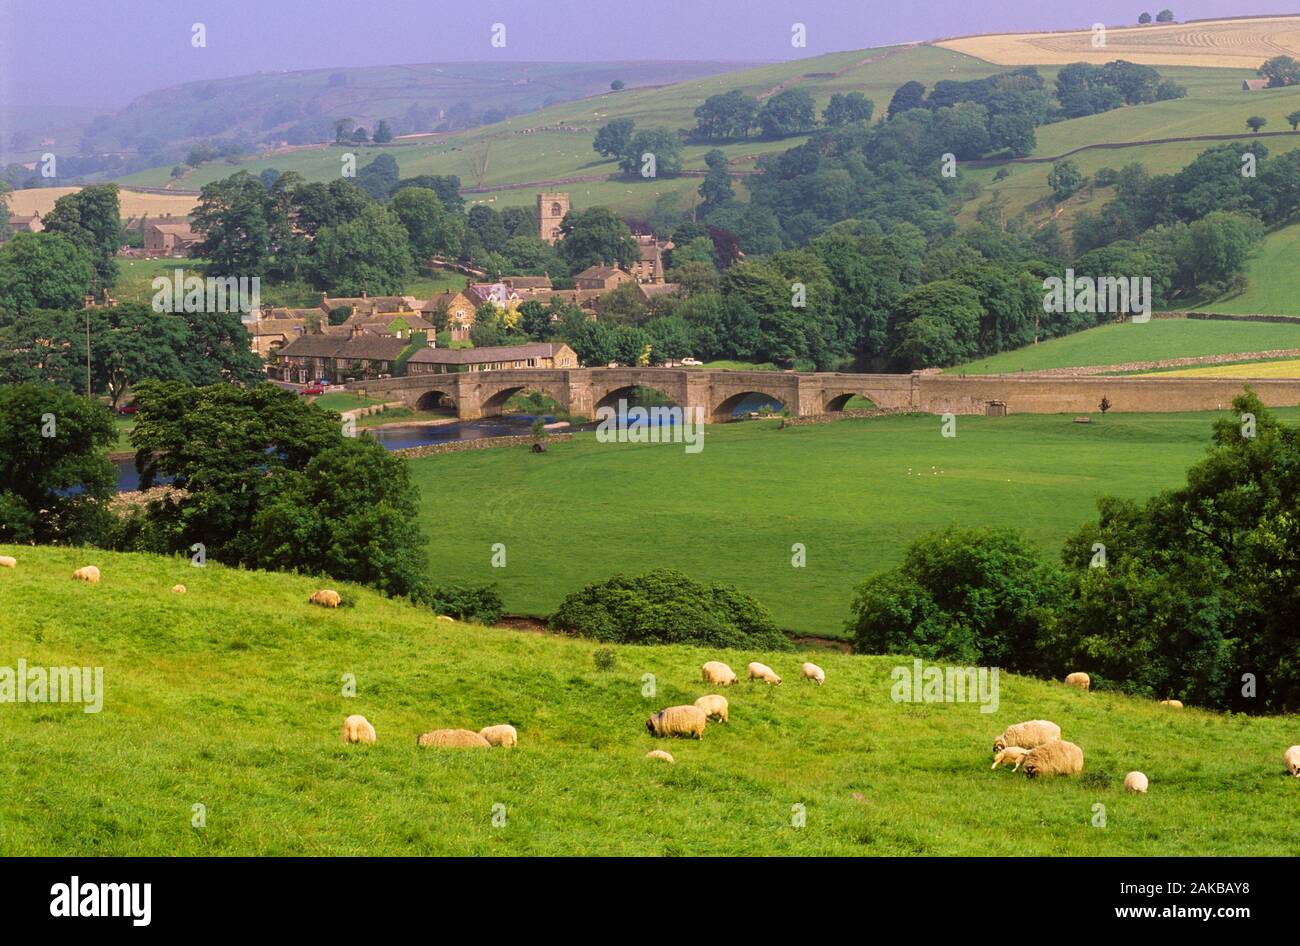 Rural landscape with grazing sheep, village and bridge, Burnsall, Yorkshire Dales National Park, England, UK Stock Photo